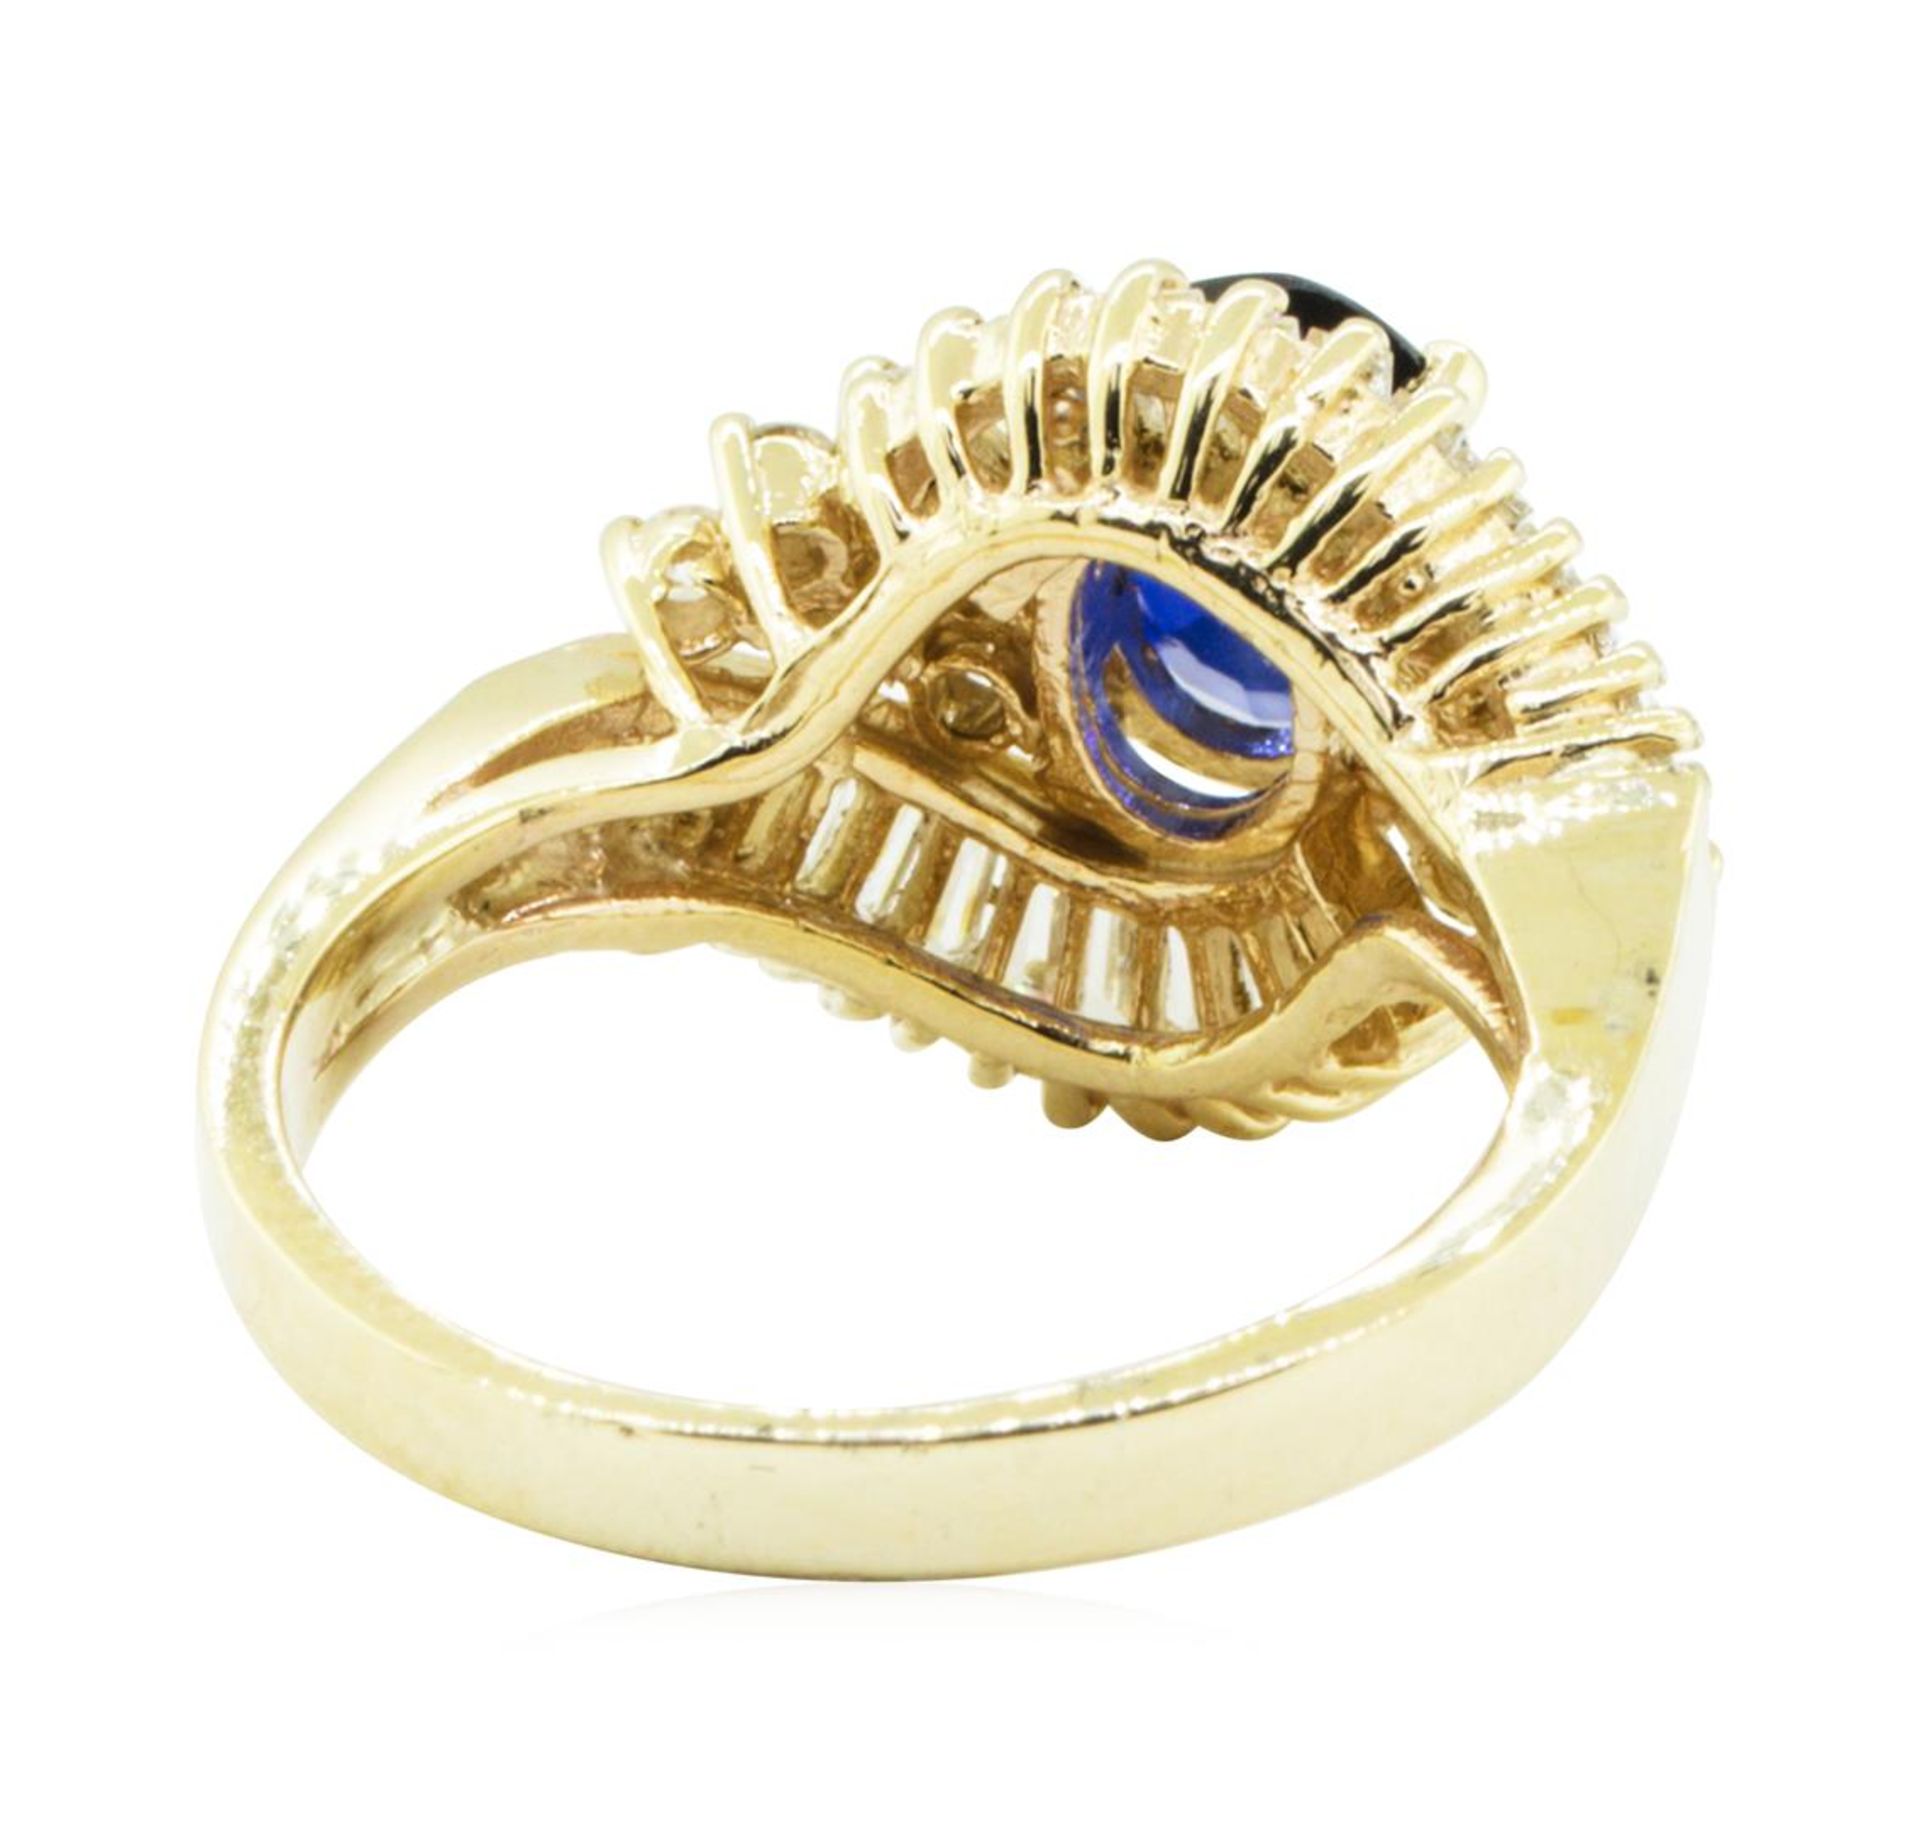 2.19 ctw Oval Brilliant Blue Sapphire And Diamond Ring - 14KT Yellow Gold - Image 3 of 5